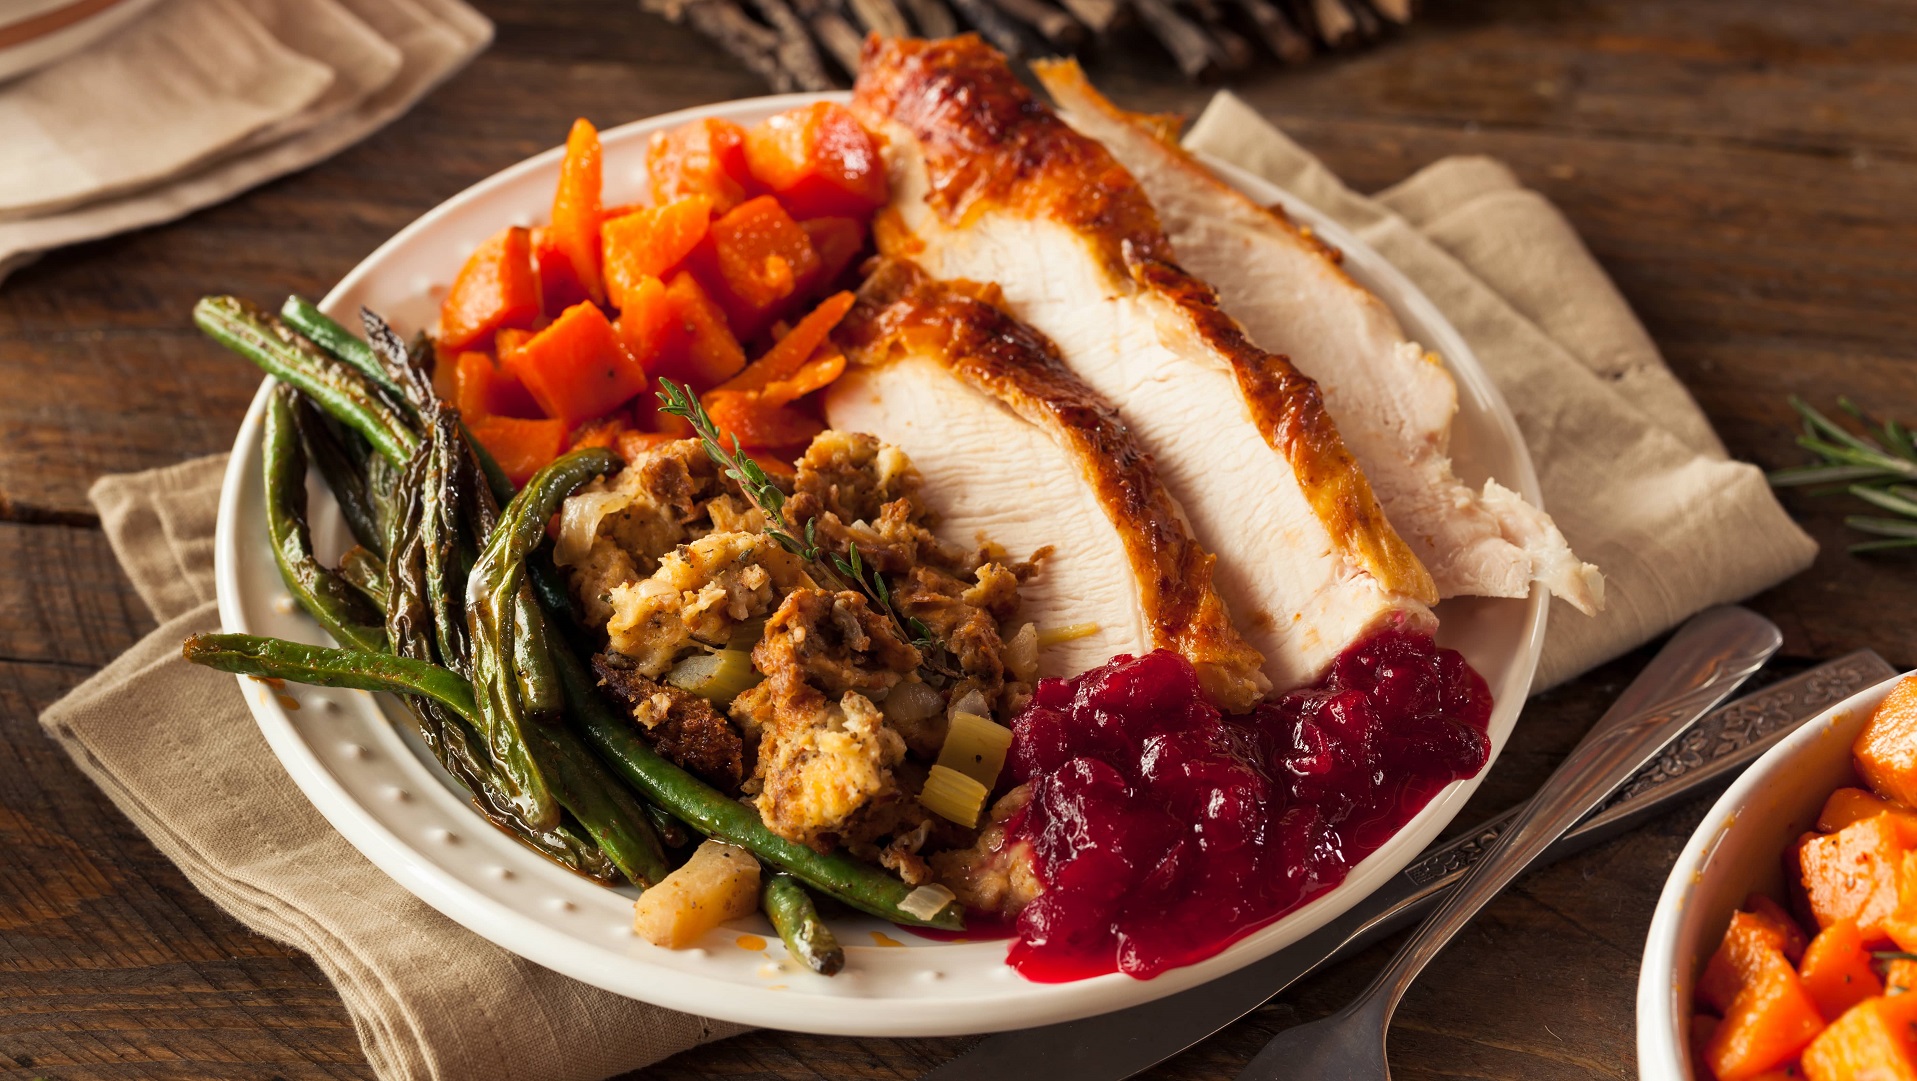 Plate full of turkey, stuffing, green beans, cranberry sauce